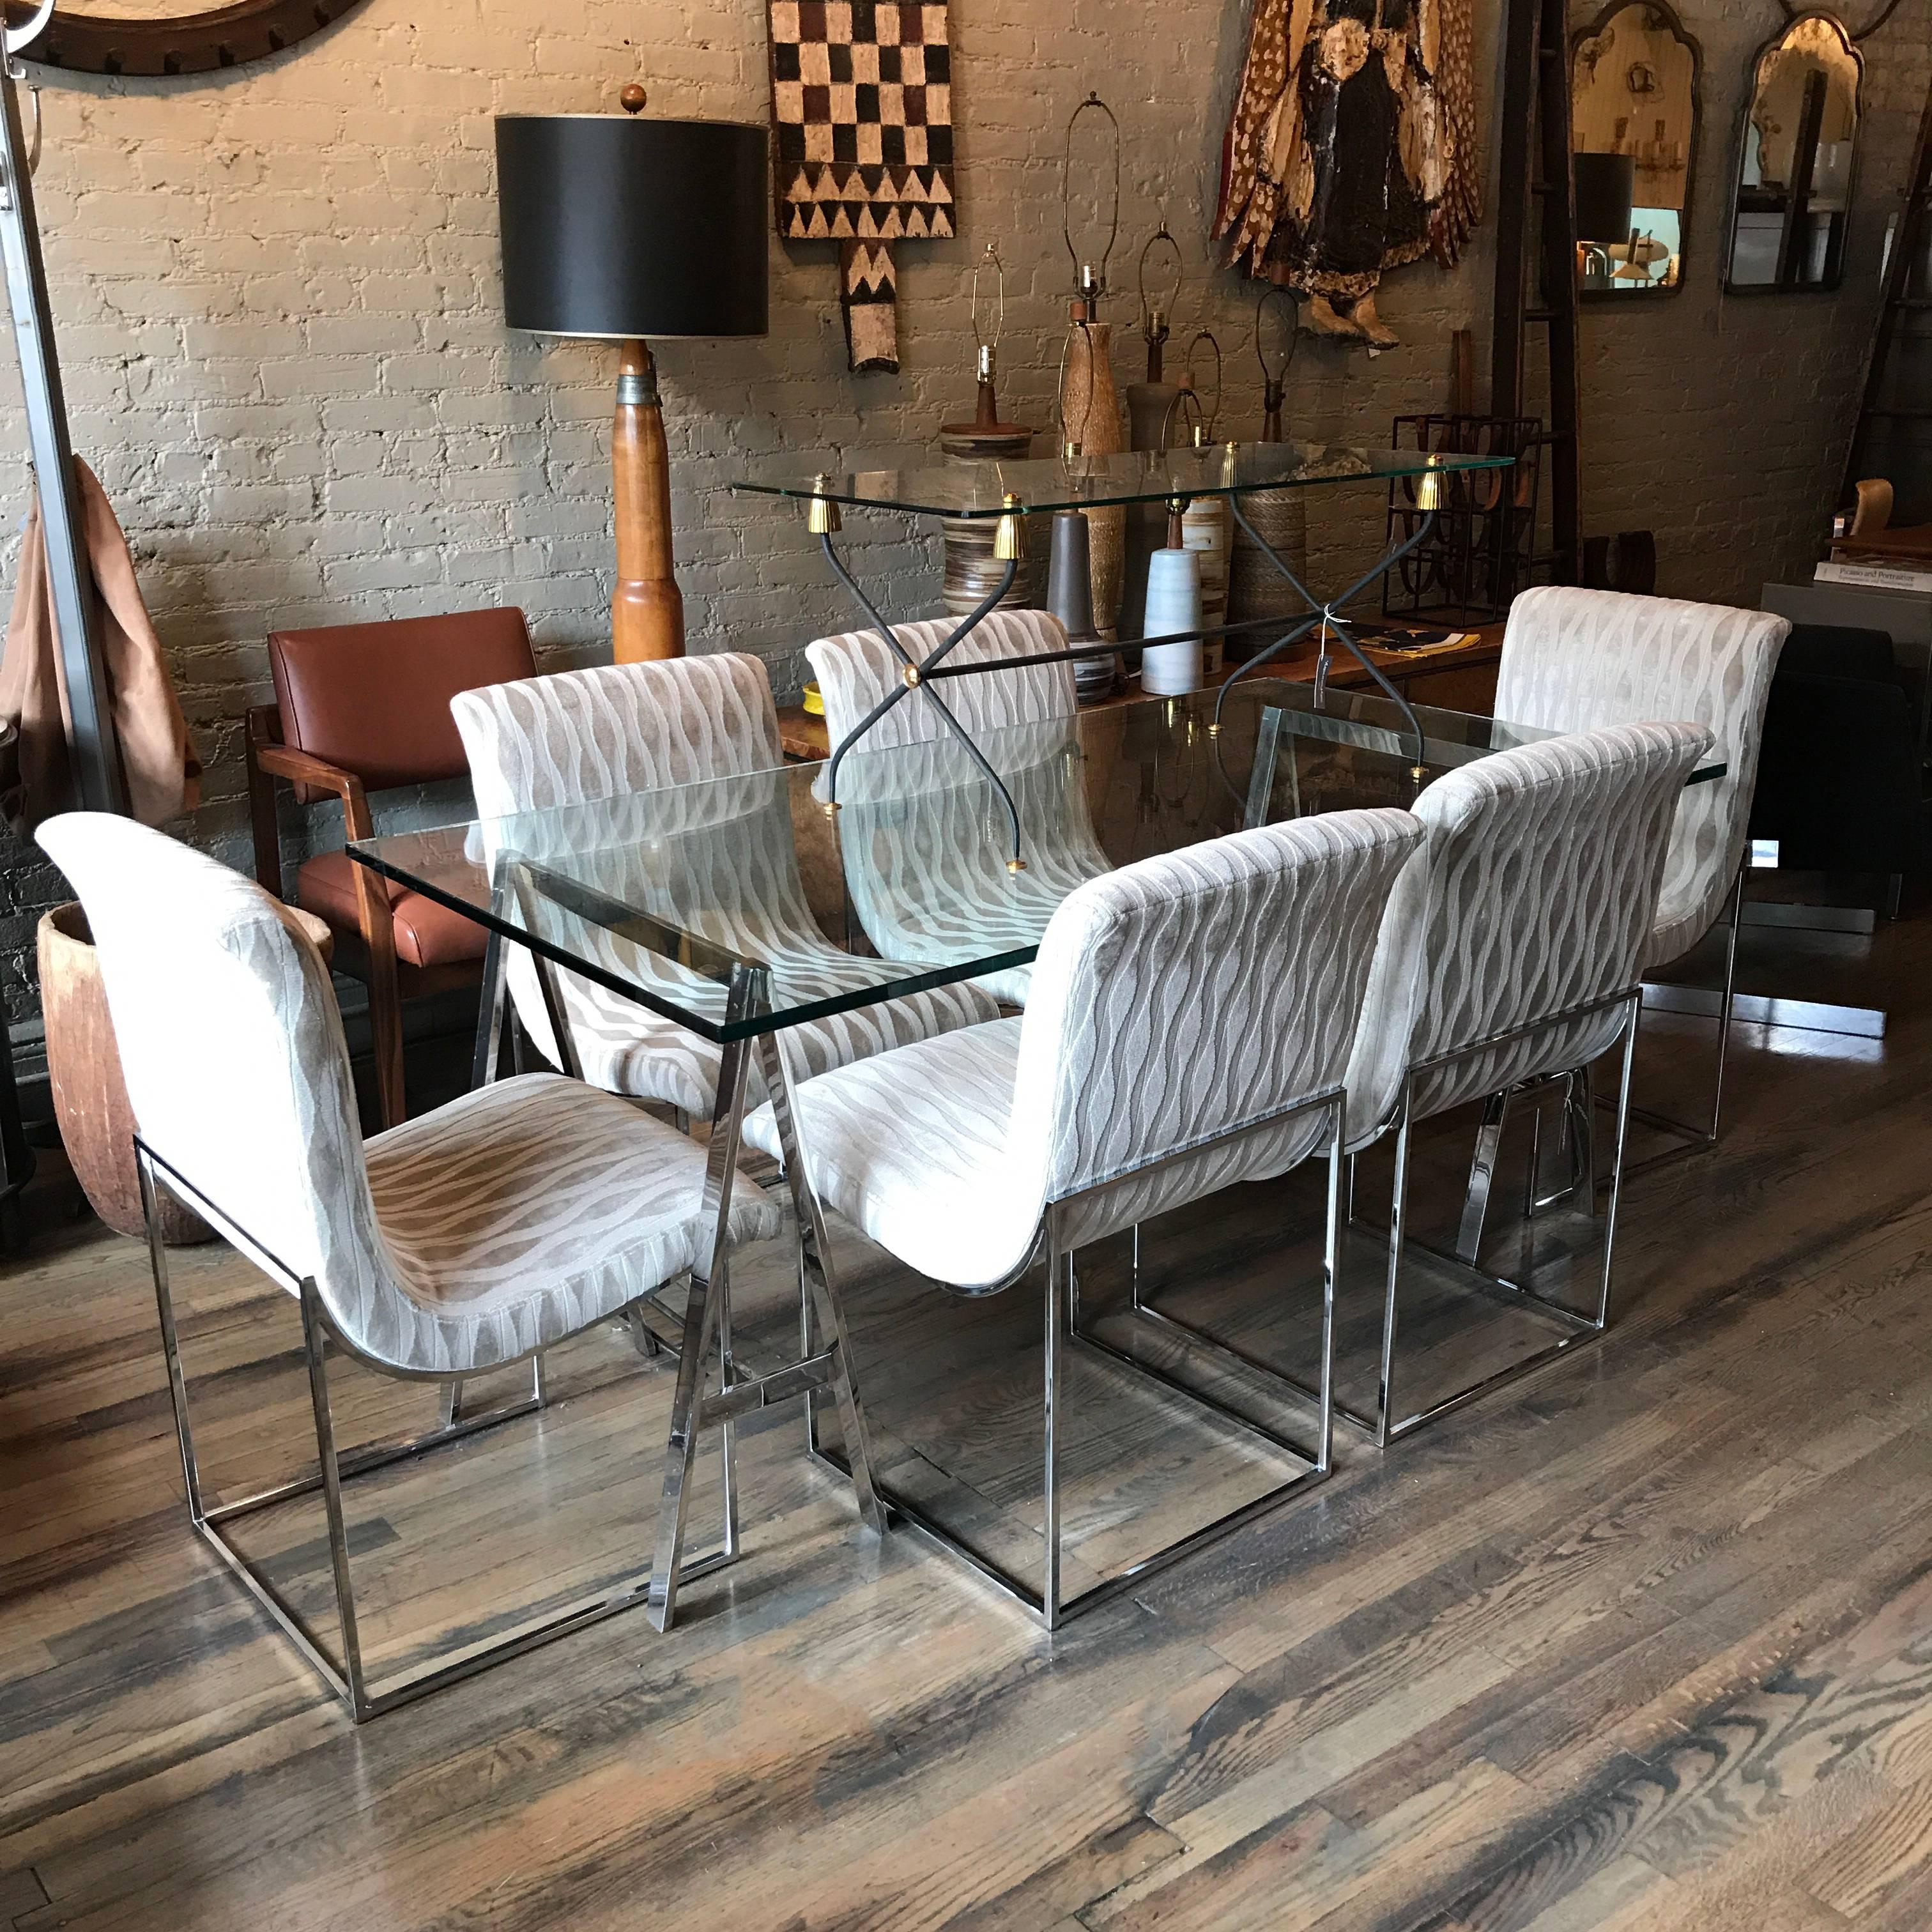 Stunning set of six Milo Baughman for Thayer Coggin dining chairs featuring newly upholstered "scoop" seats in light taupe/champagne, velvet jacquard that float atop minimal chrome bases. The Milo Baughman 3/4" glass and chrome saw